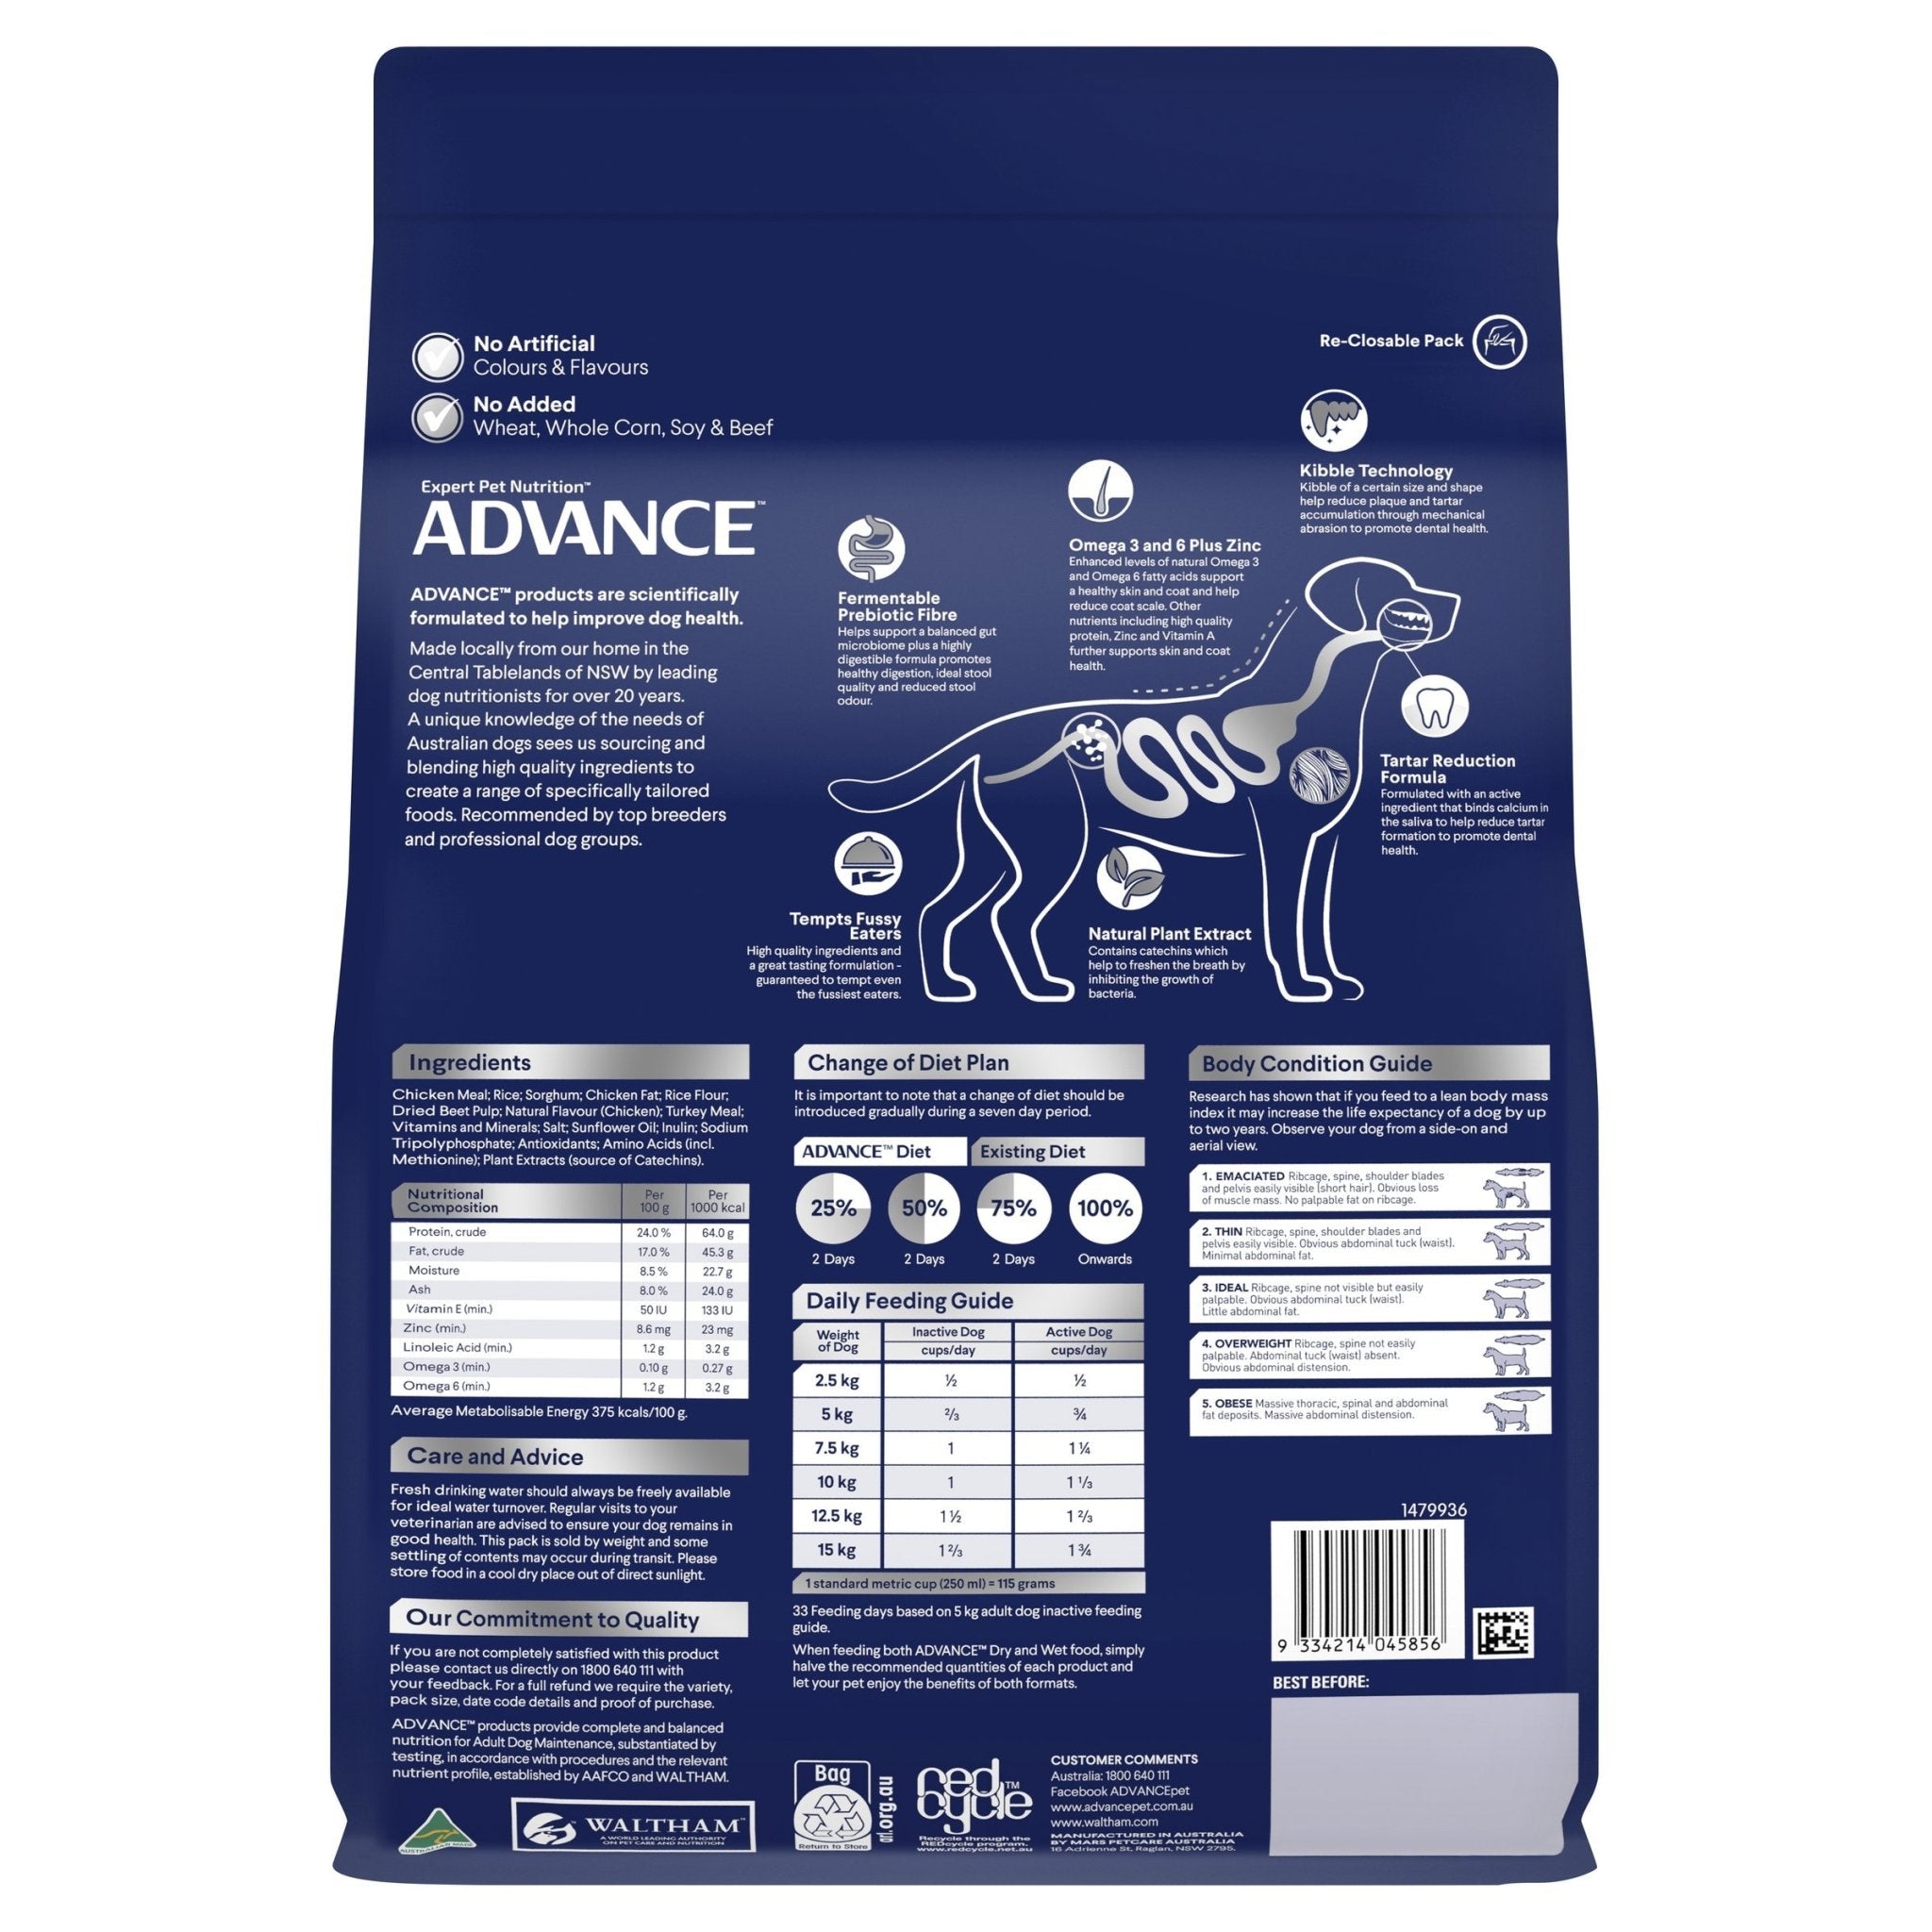 ADVANCE Triple Action Dental Care Small Adult Dry Dog Food Chicken with Rice 2.5kg Bag